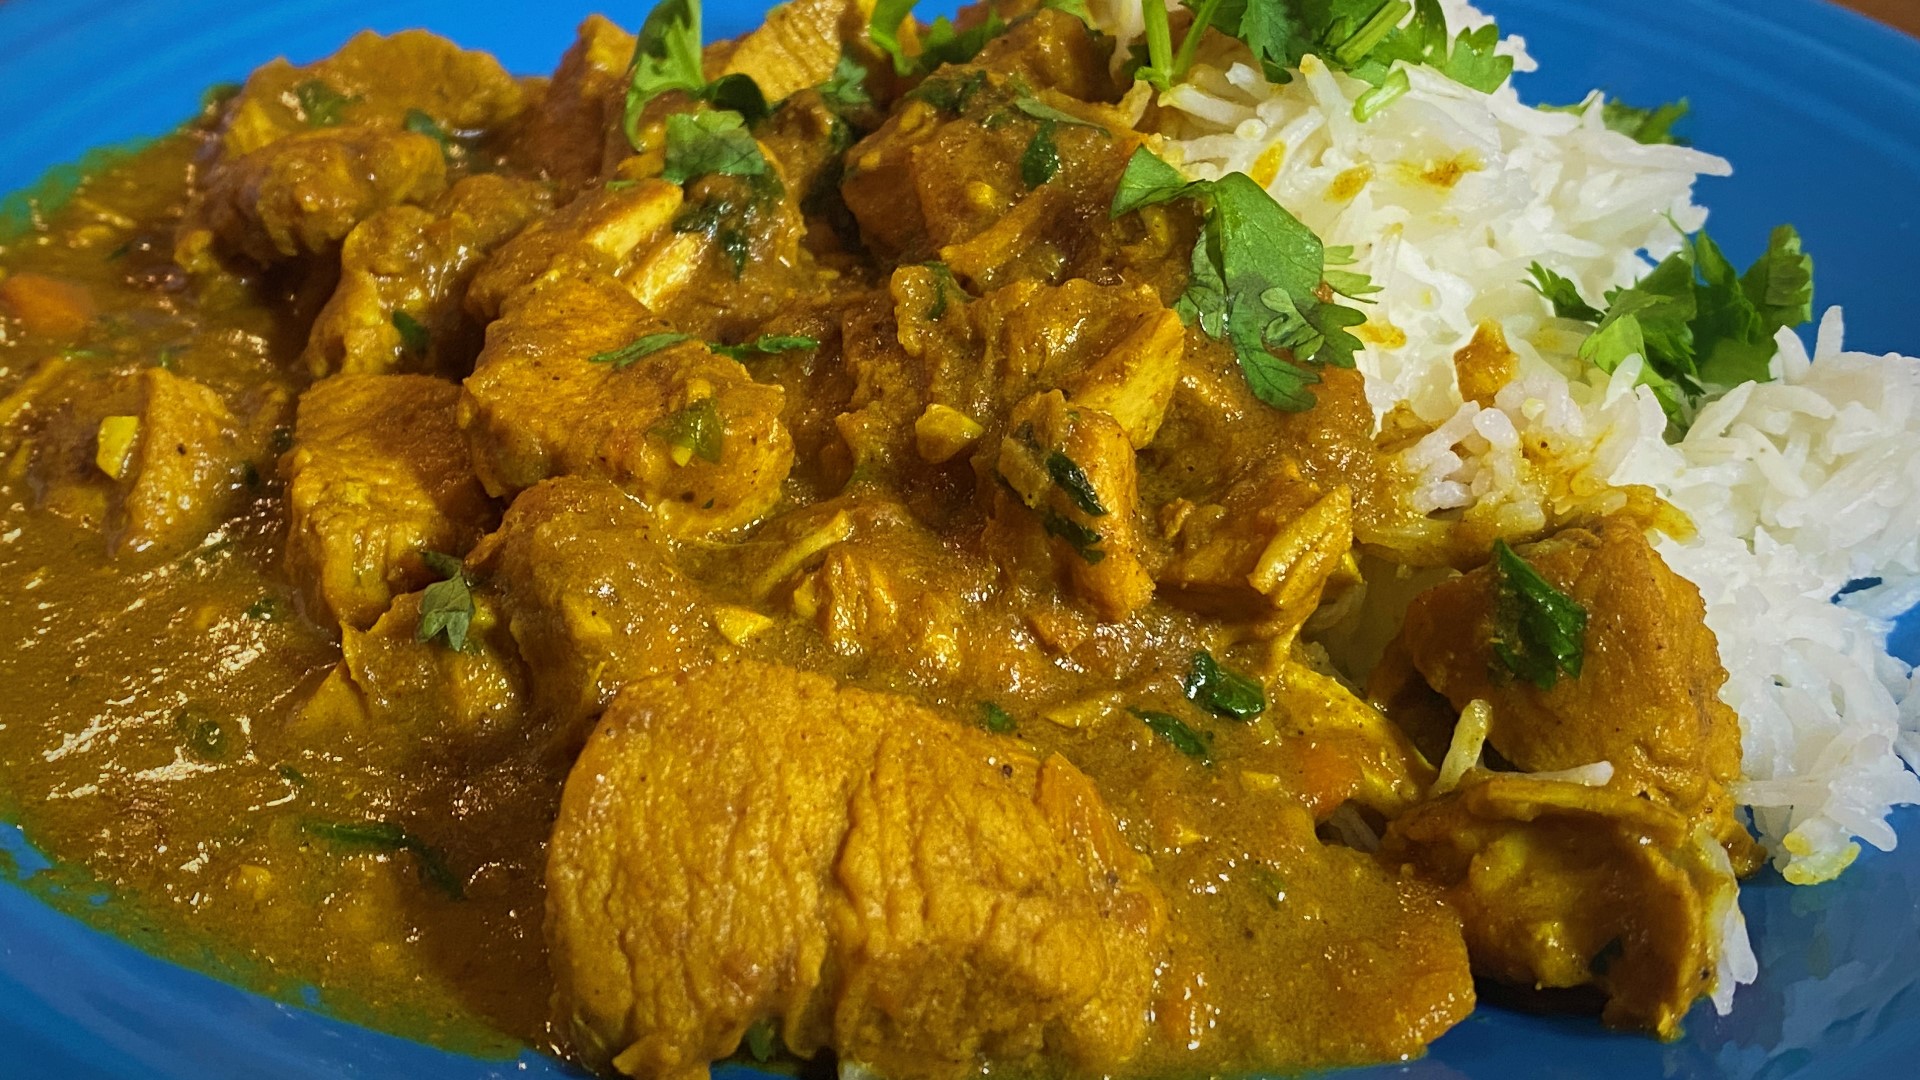 The inspiration for this Curry came from a restaurant in Pacific Beach, World Curry.